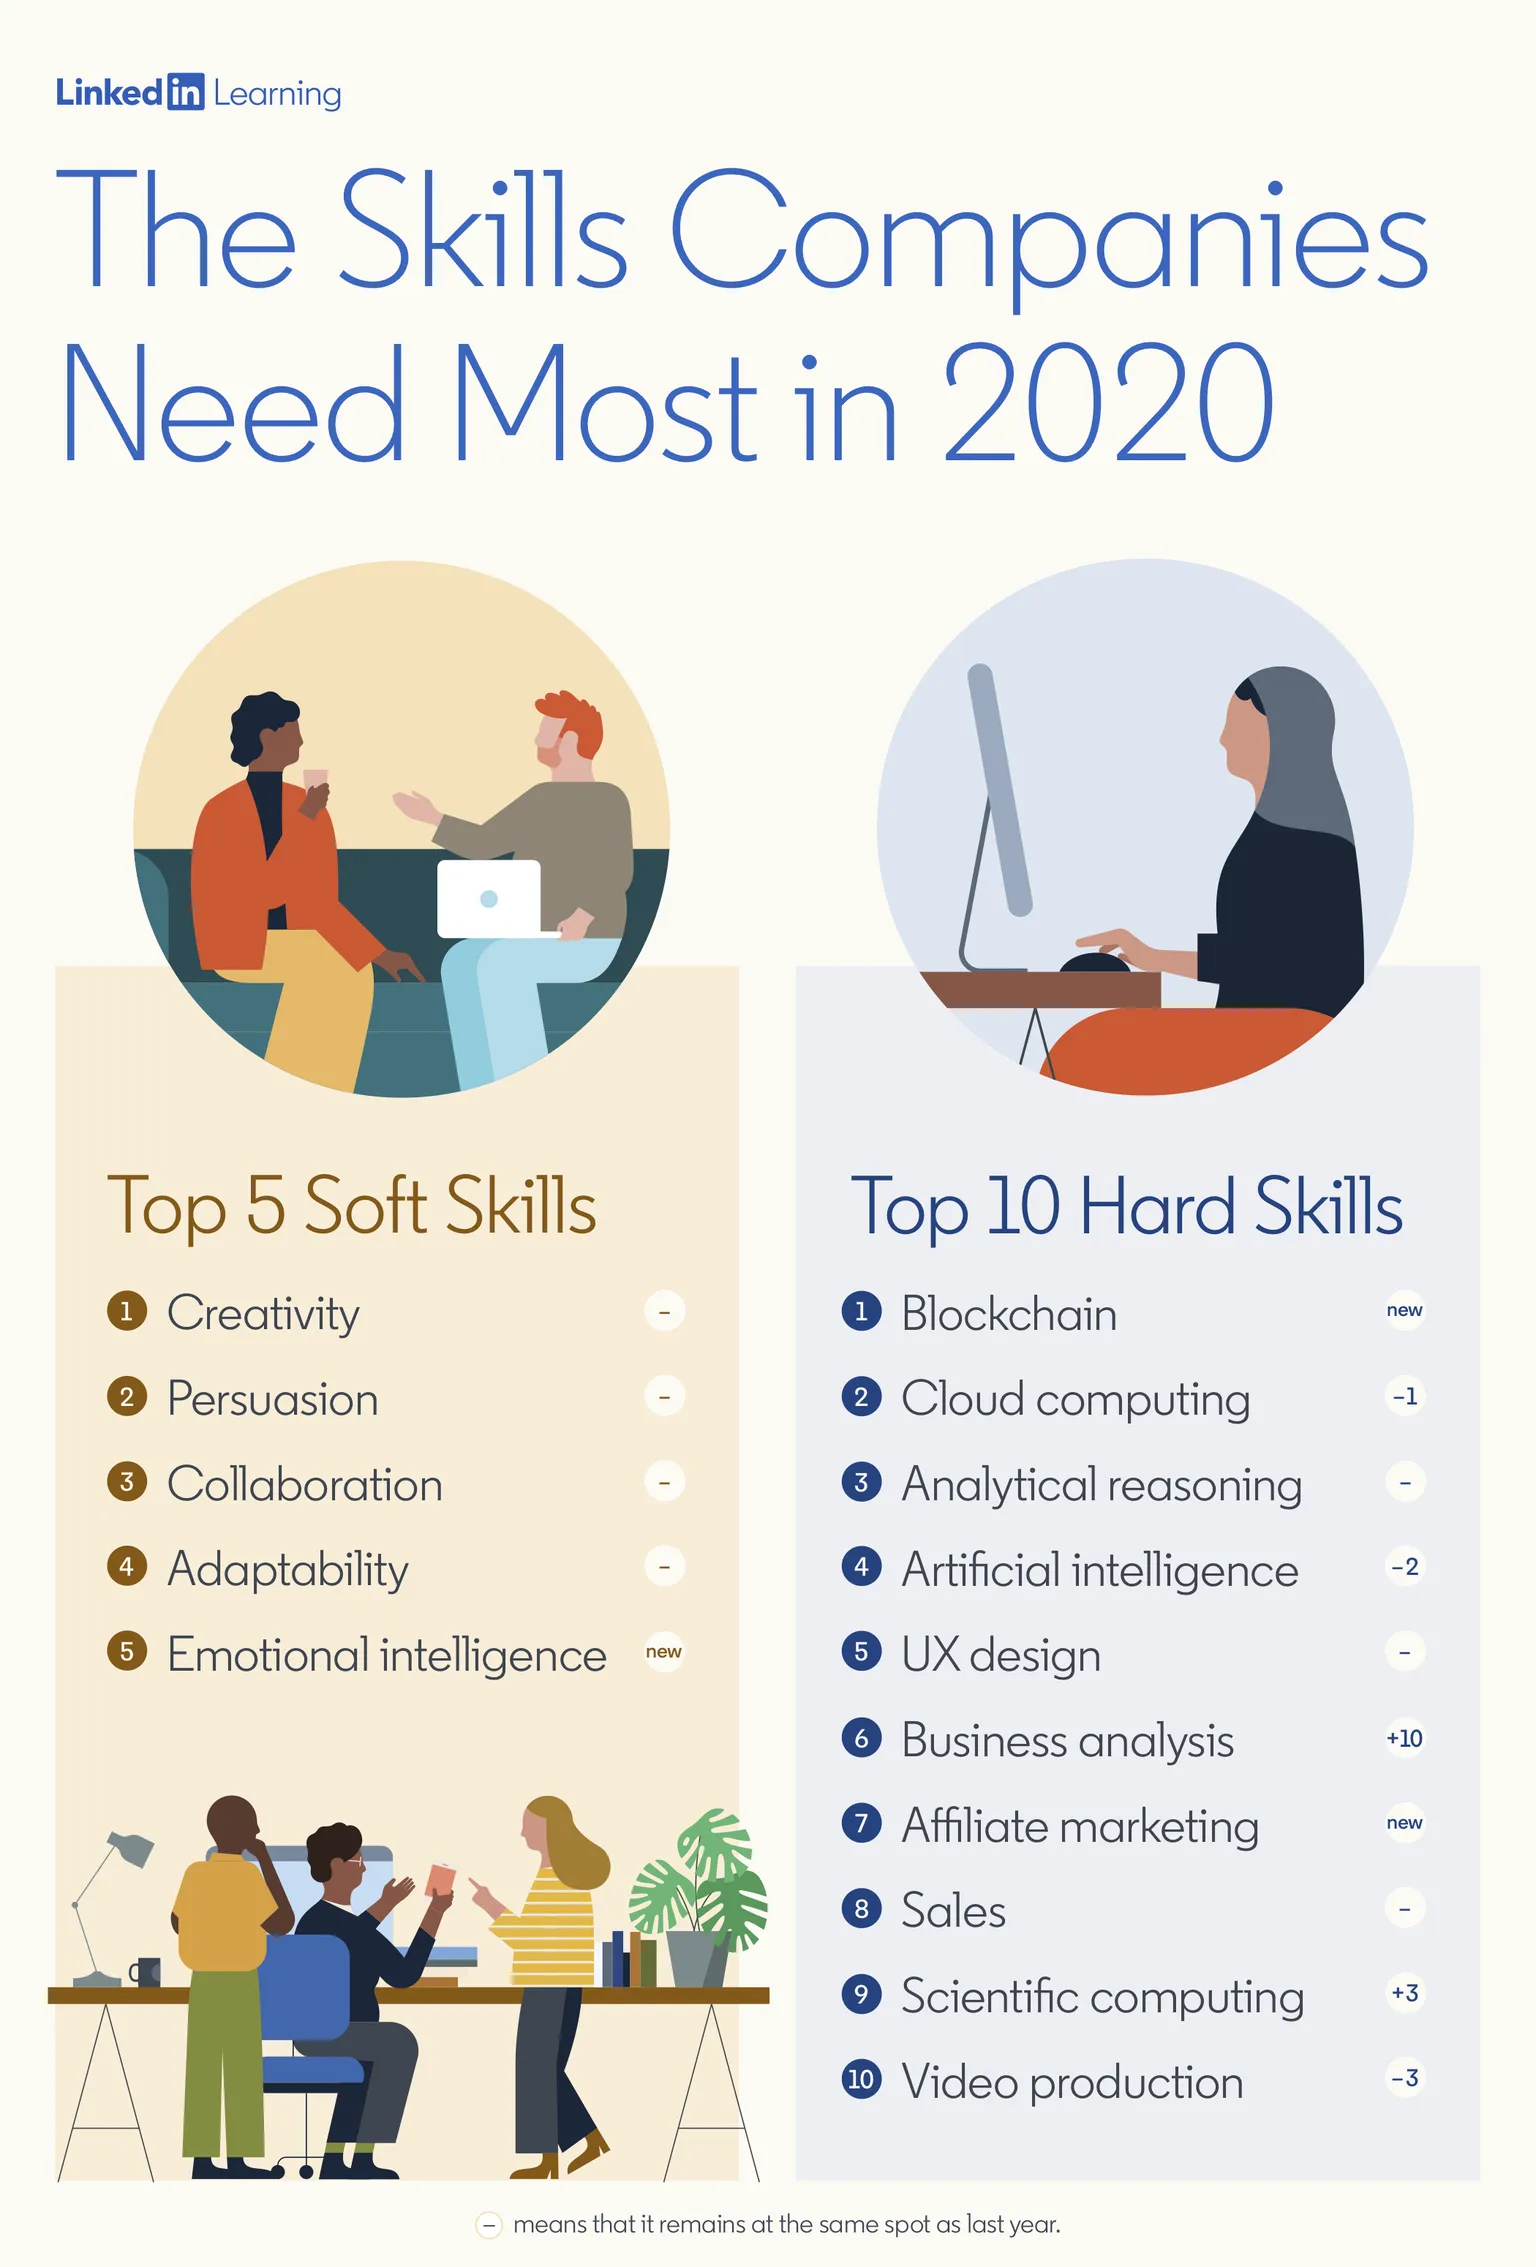 LinkedIn ranks the skills most needed in 2020